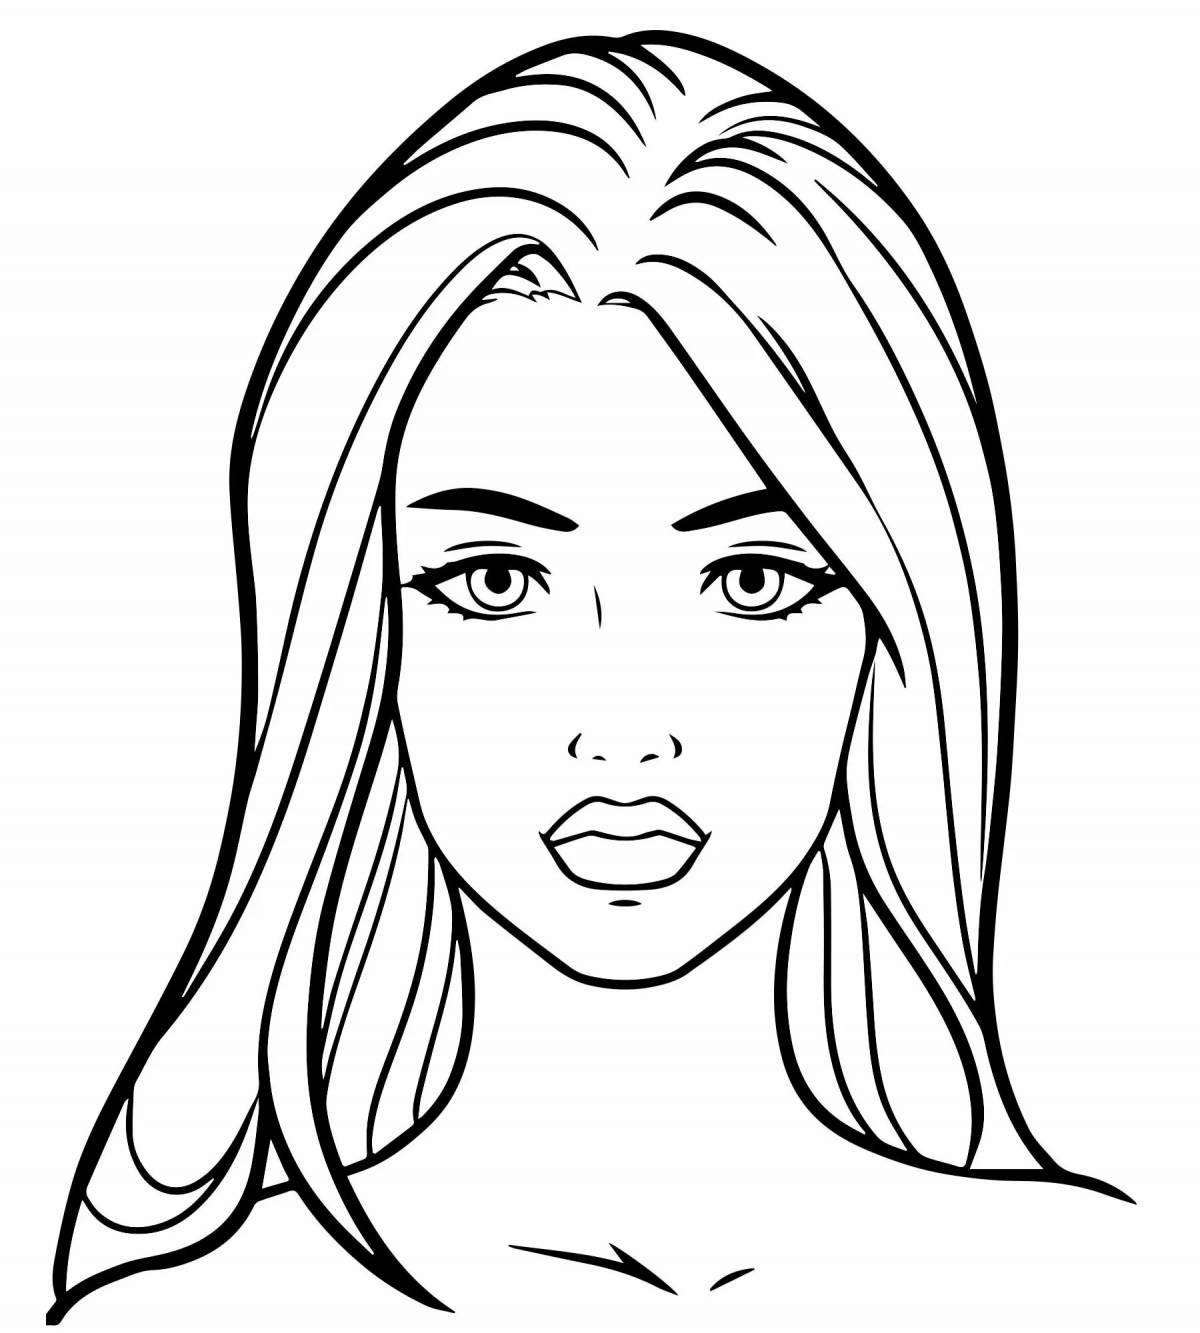 Smiling face coloring for girls